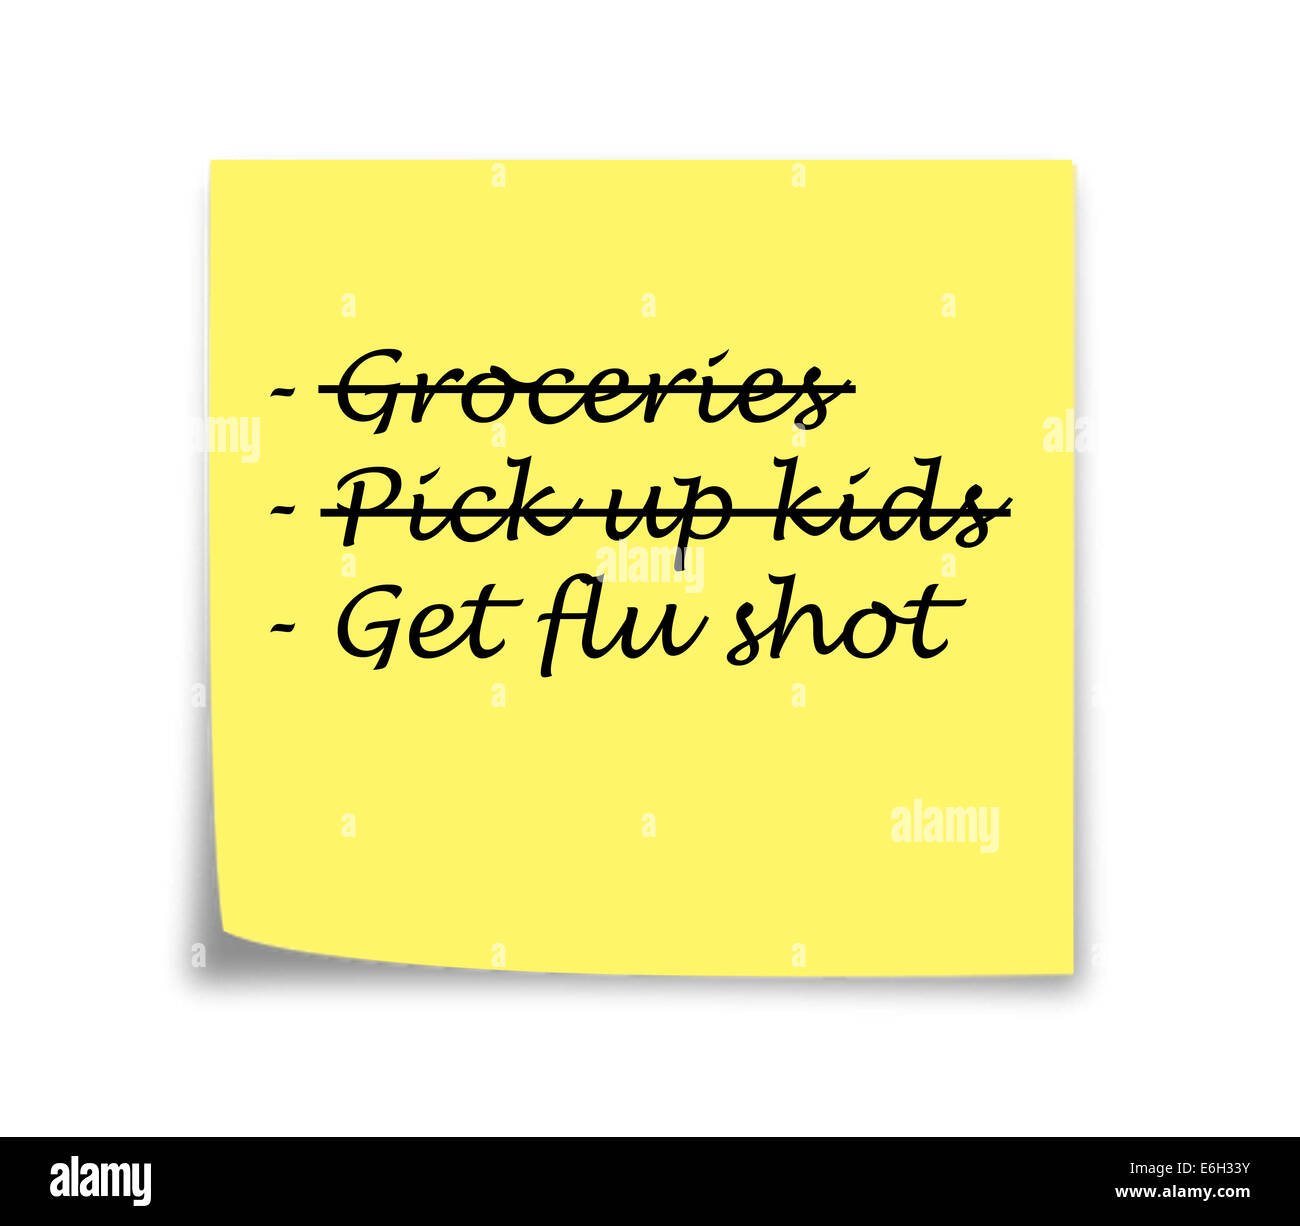 Sticky note reminder to get flu shot, black on yellow Stock Photo